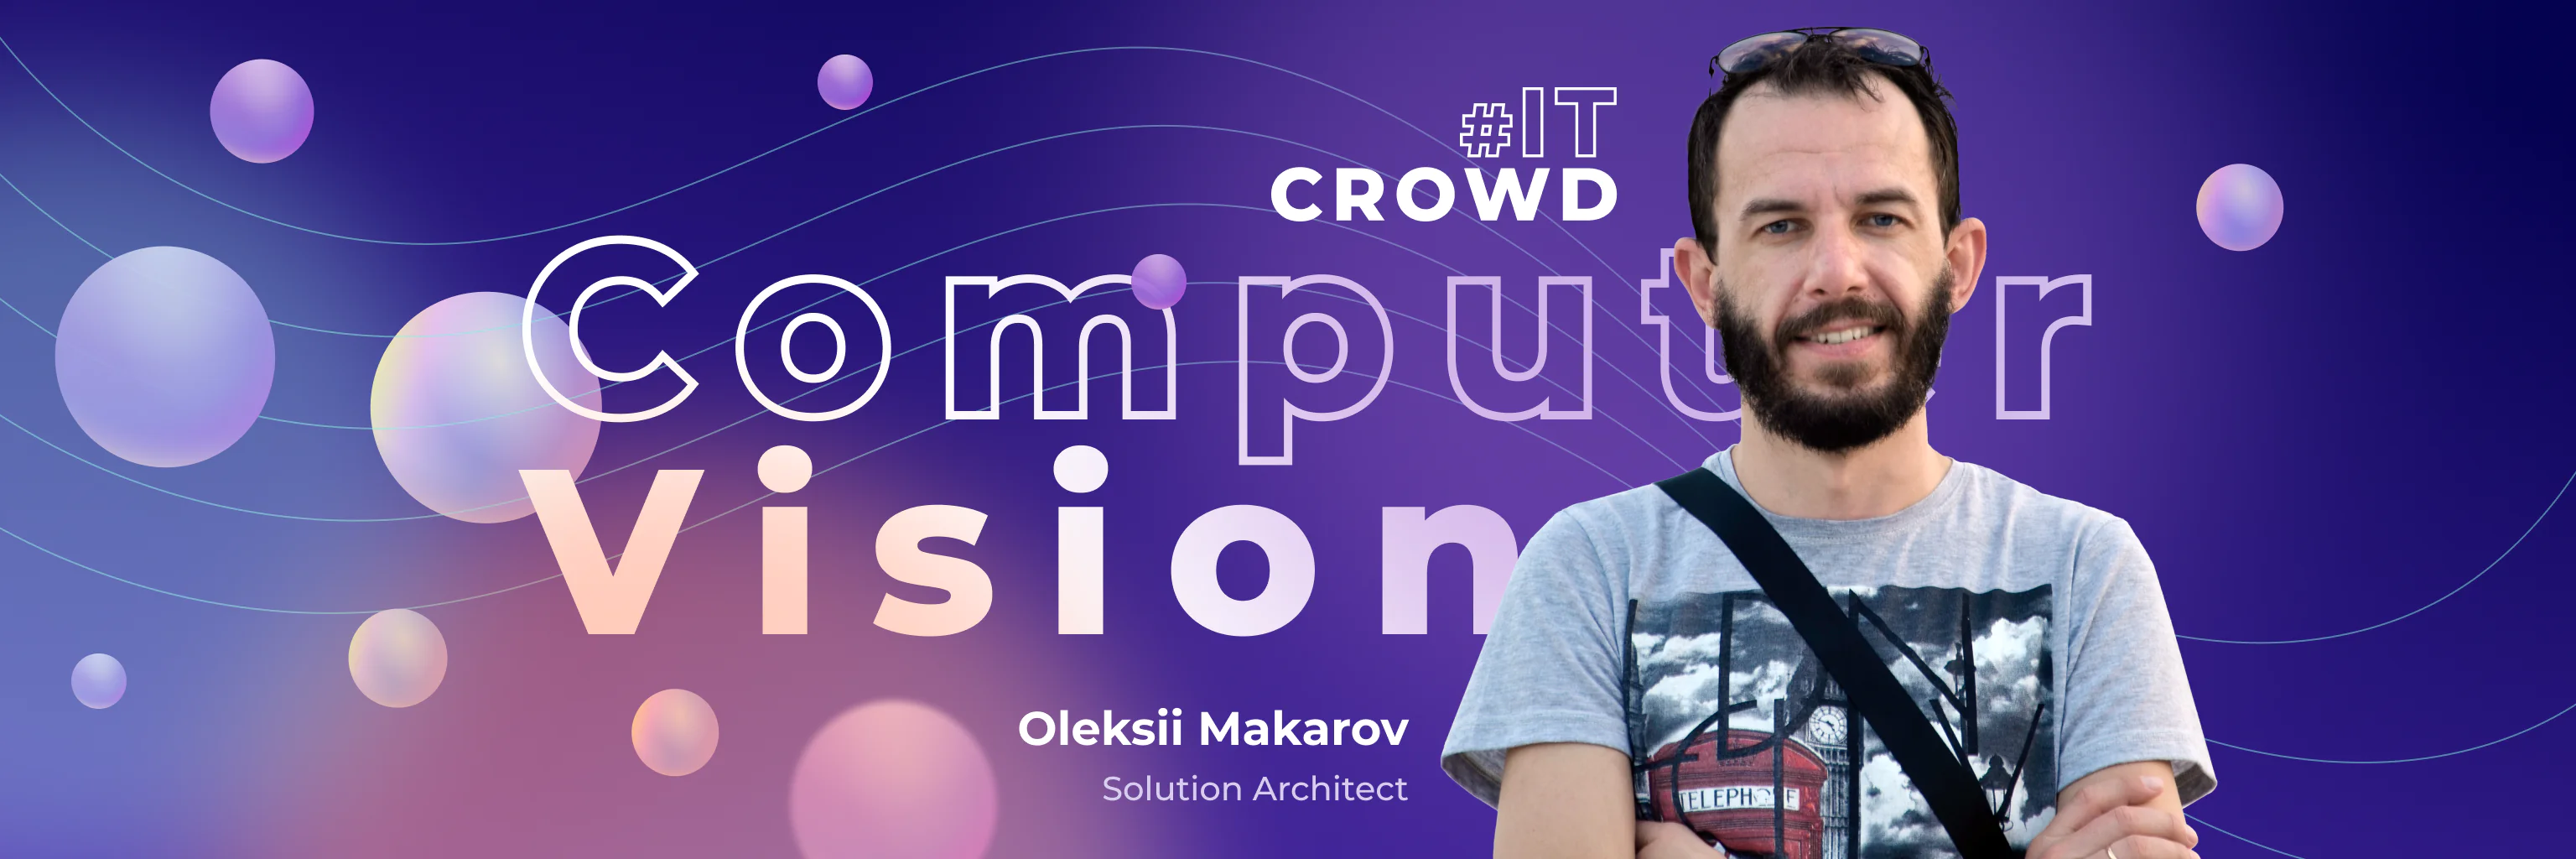 computer vision in artificial intelligence software development by Oleksii Makarov.